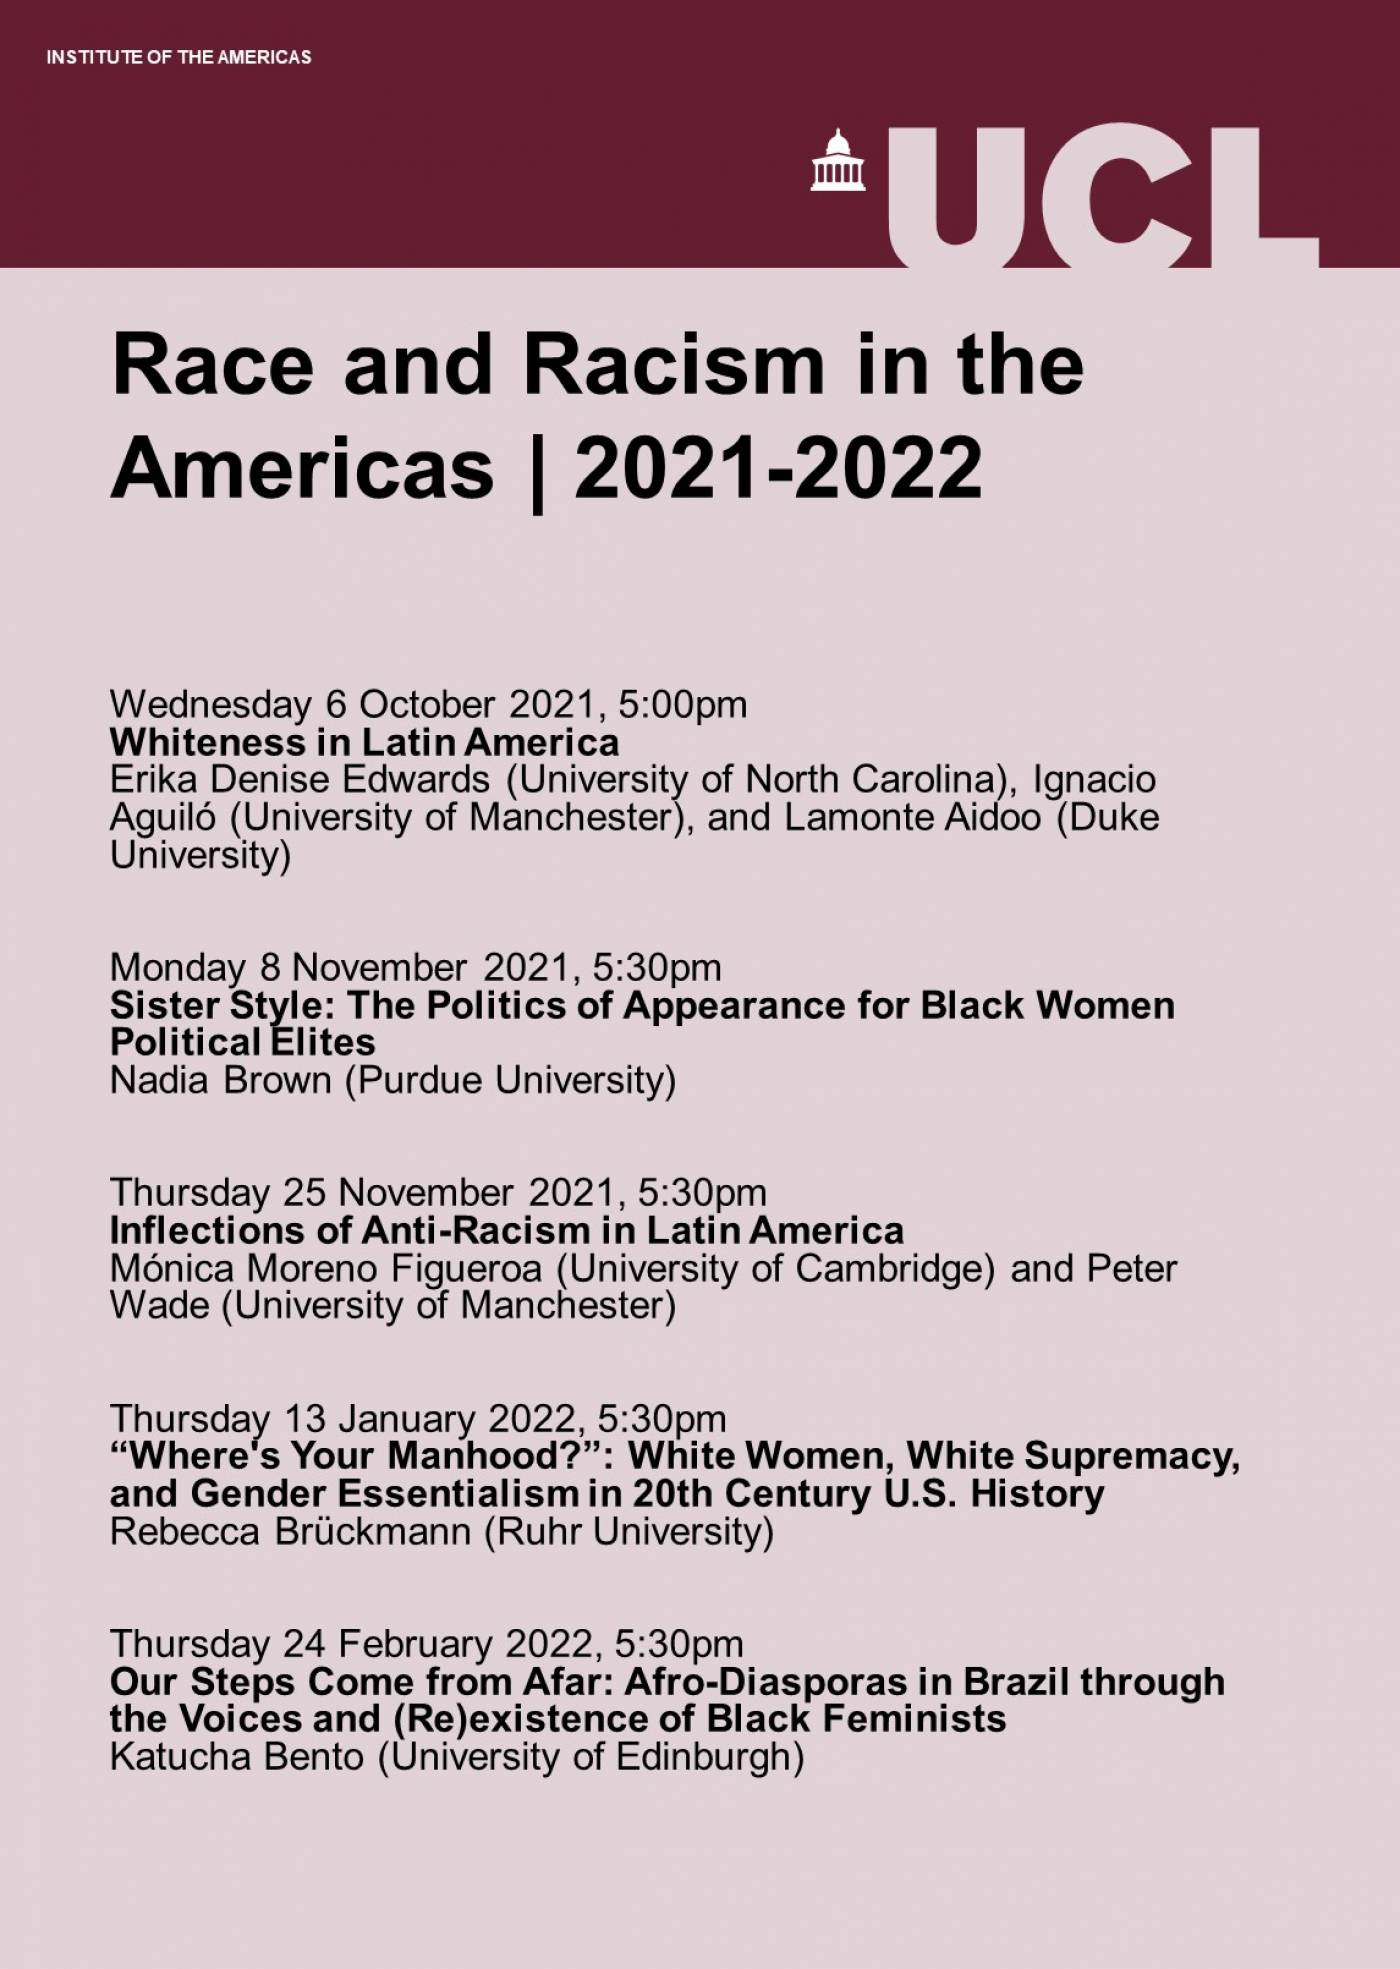 Race and Racism in the Americas series poster showing the events scheduled for the academic year 2021-22